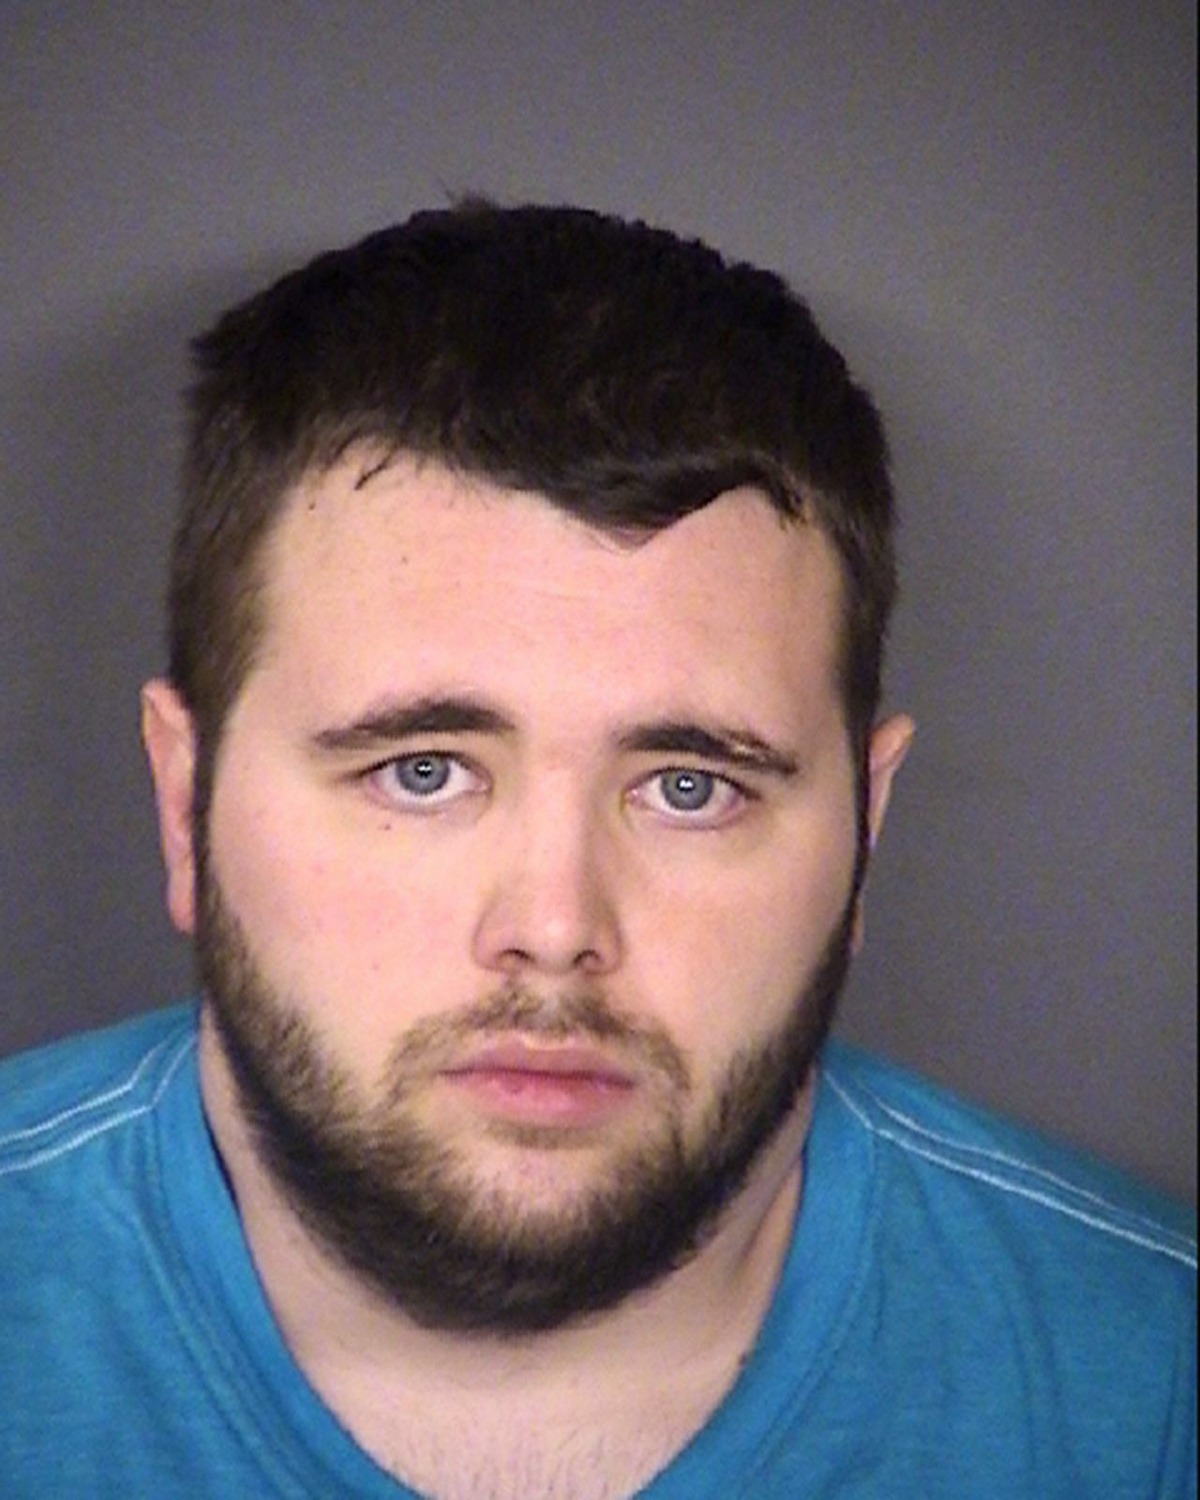 Jared Anderson was sentenced Monday to 10 years in prison for sexual performance by a child. Click ahead to view Texas teachers accused or convicted of inappropriate relations with students in 2017.